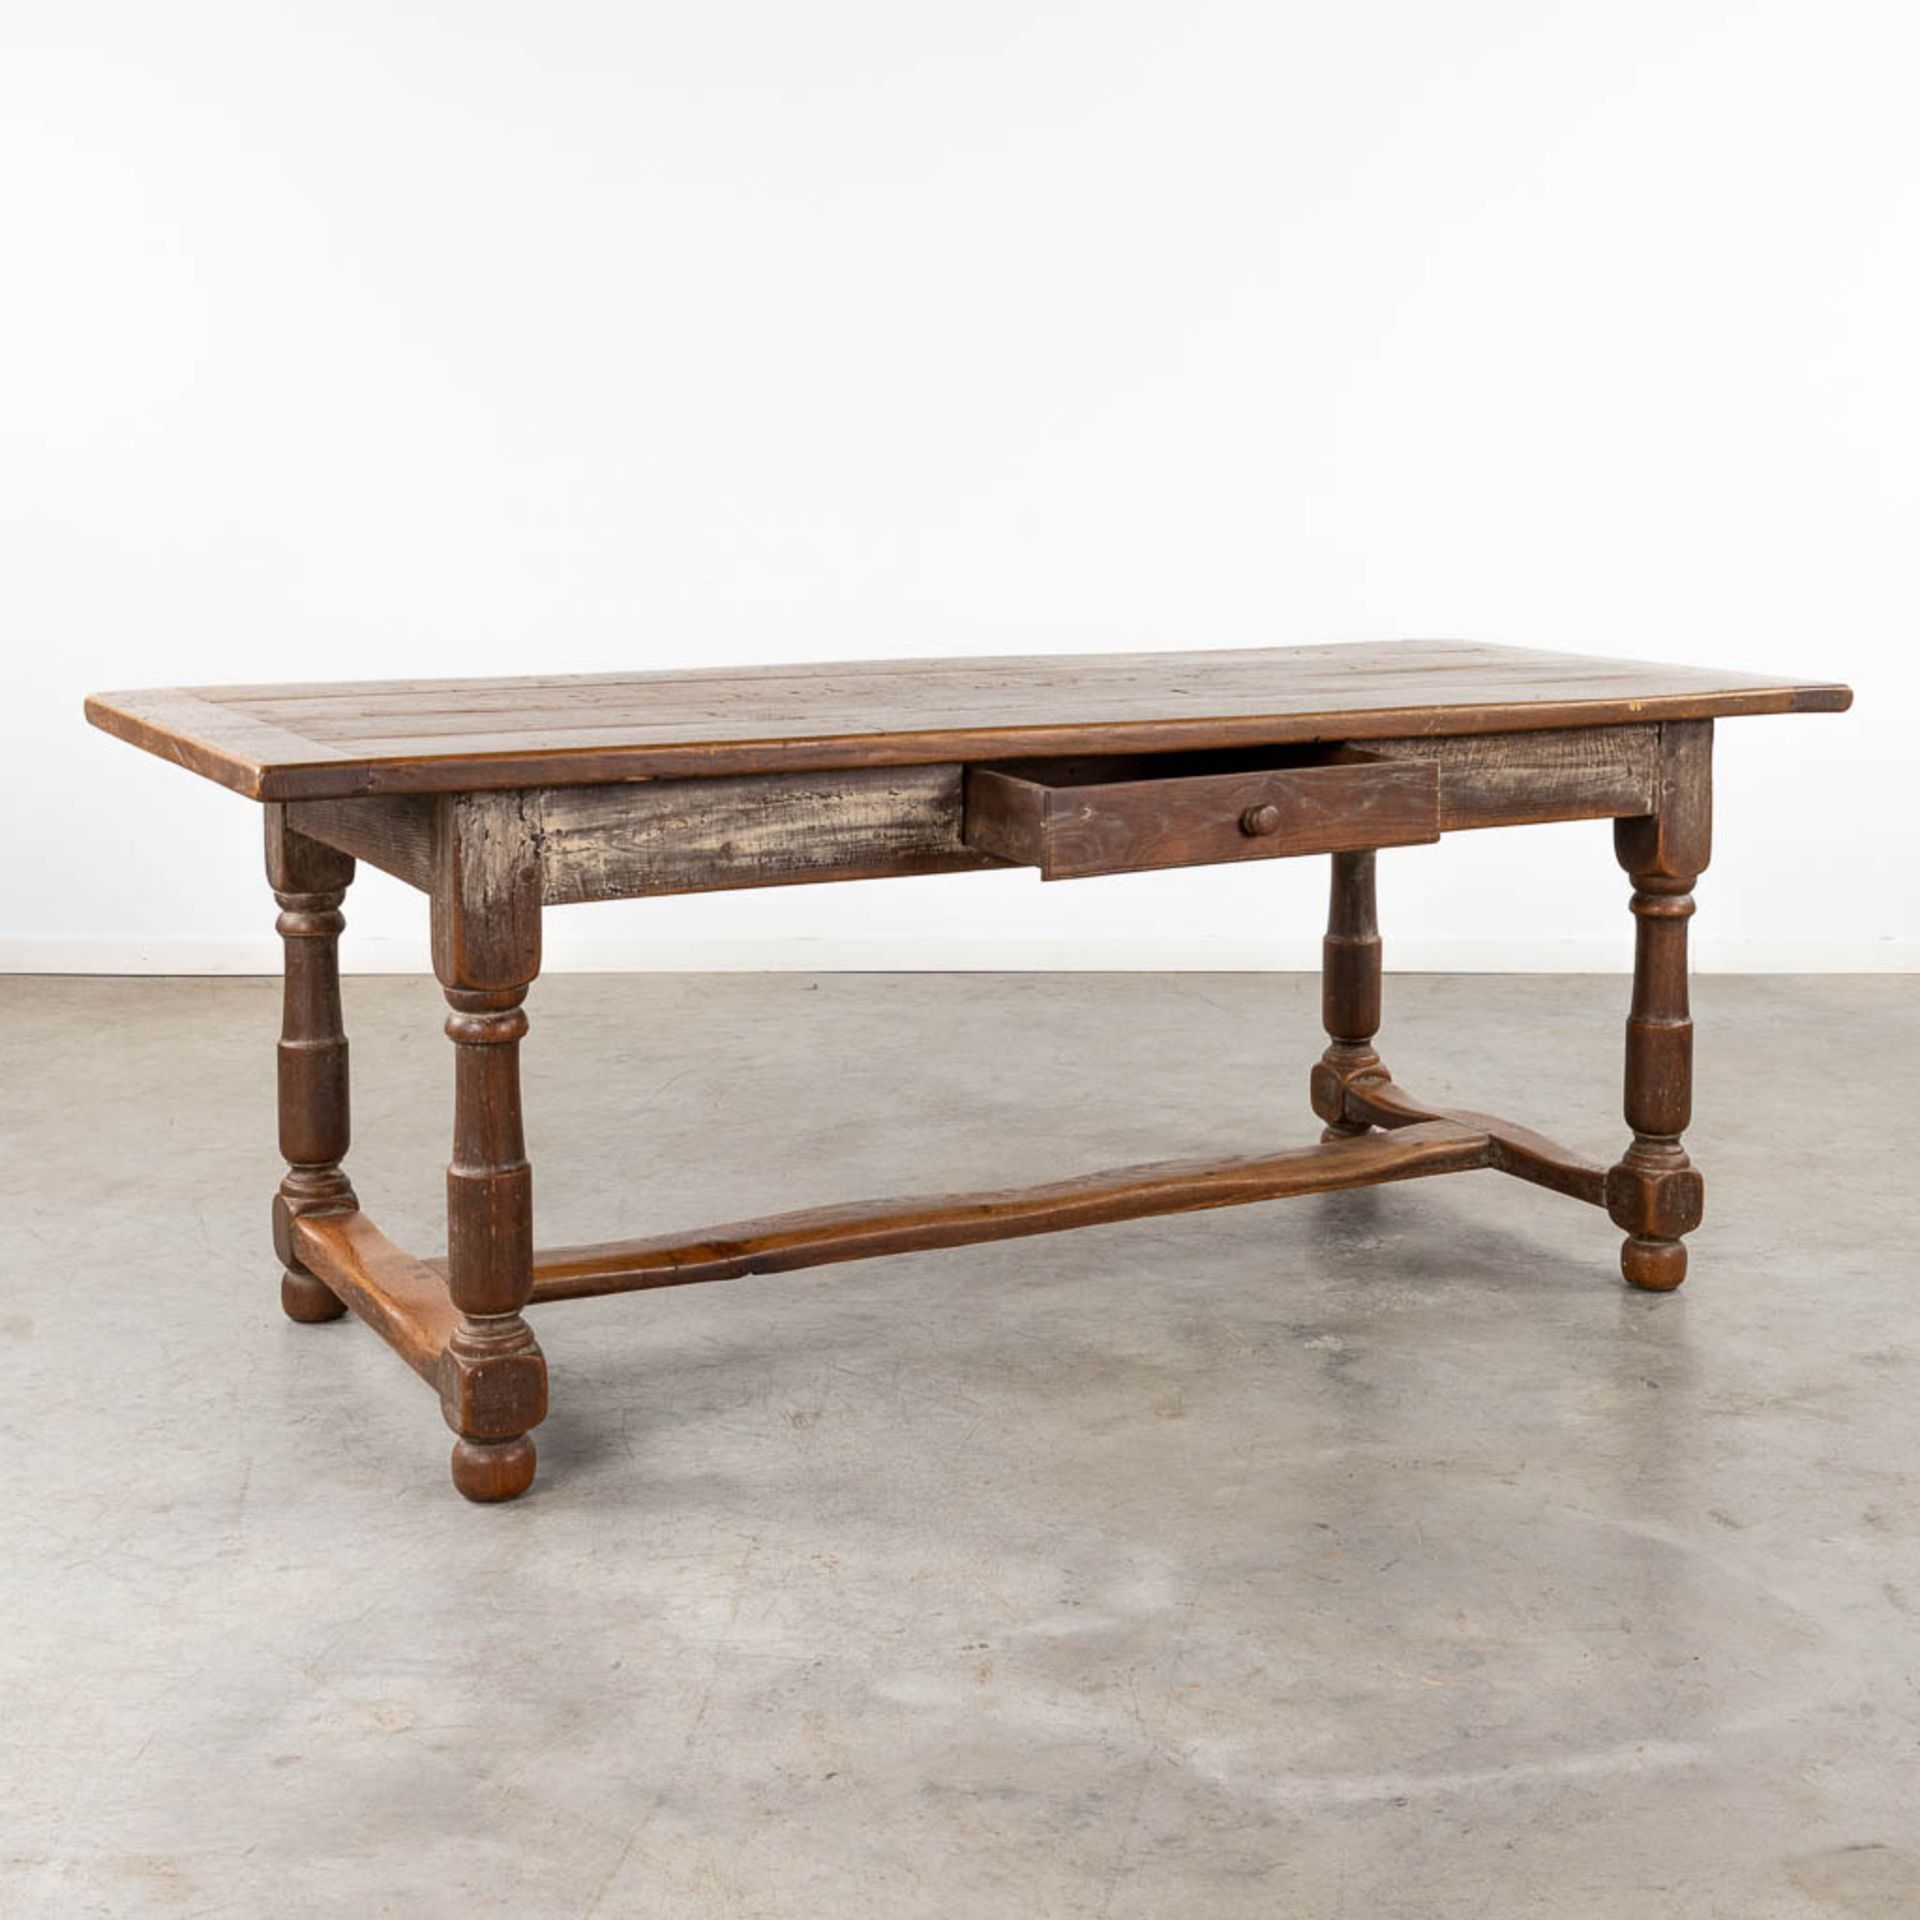 An antique farmer's table, oak, 19th C. (D:86 x W:198,5 x H:76 cm) - Image 3 of 12